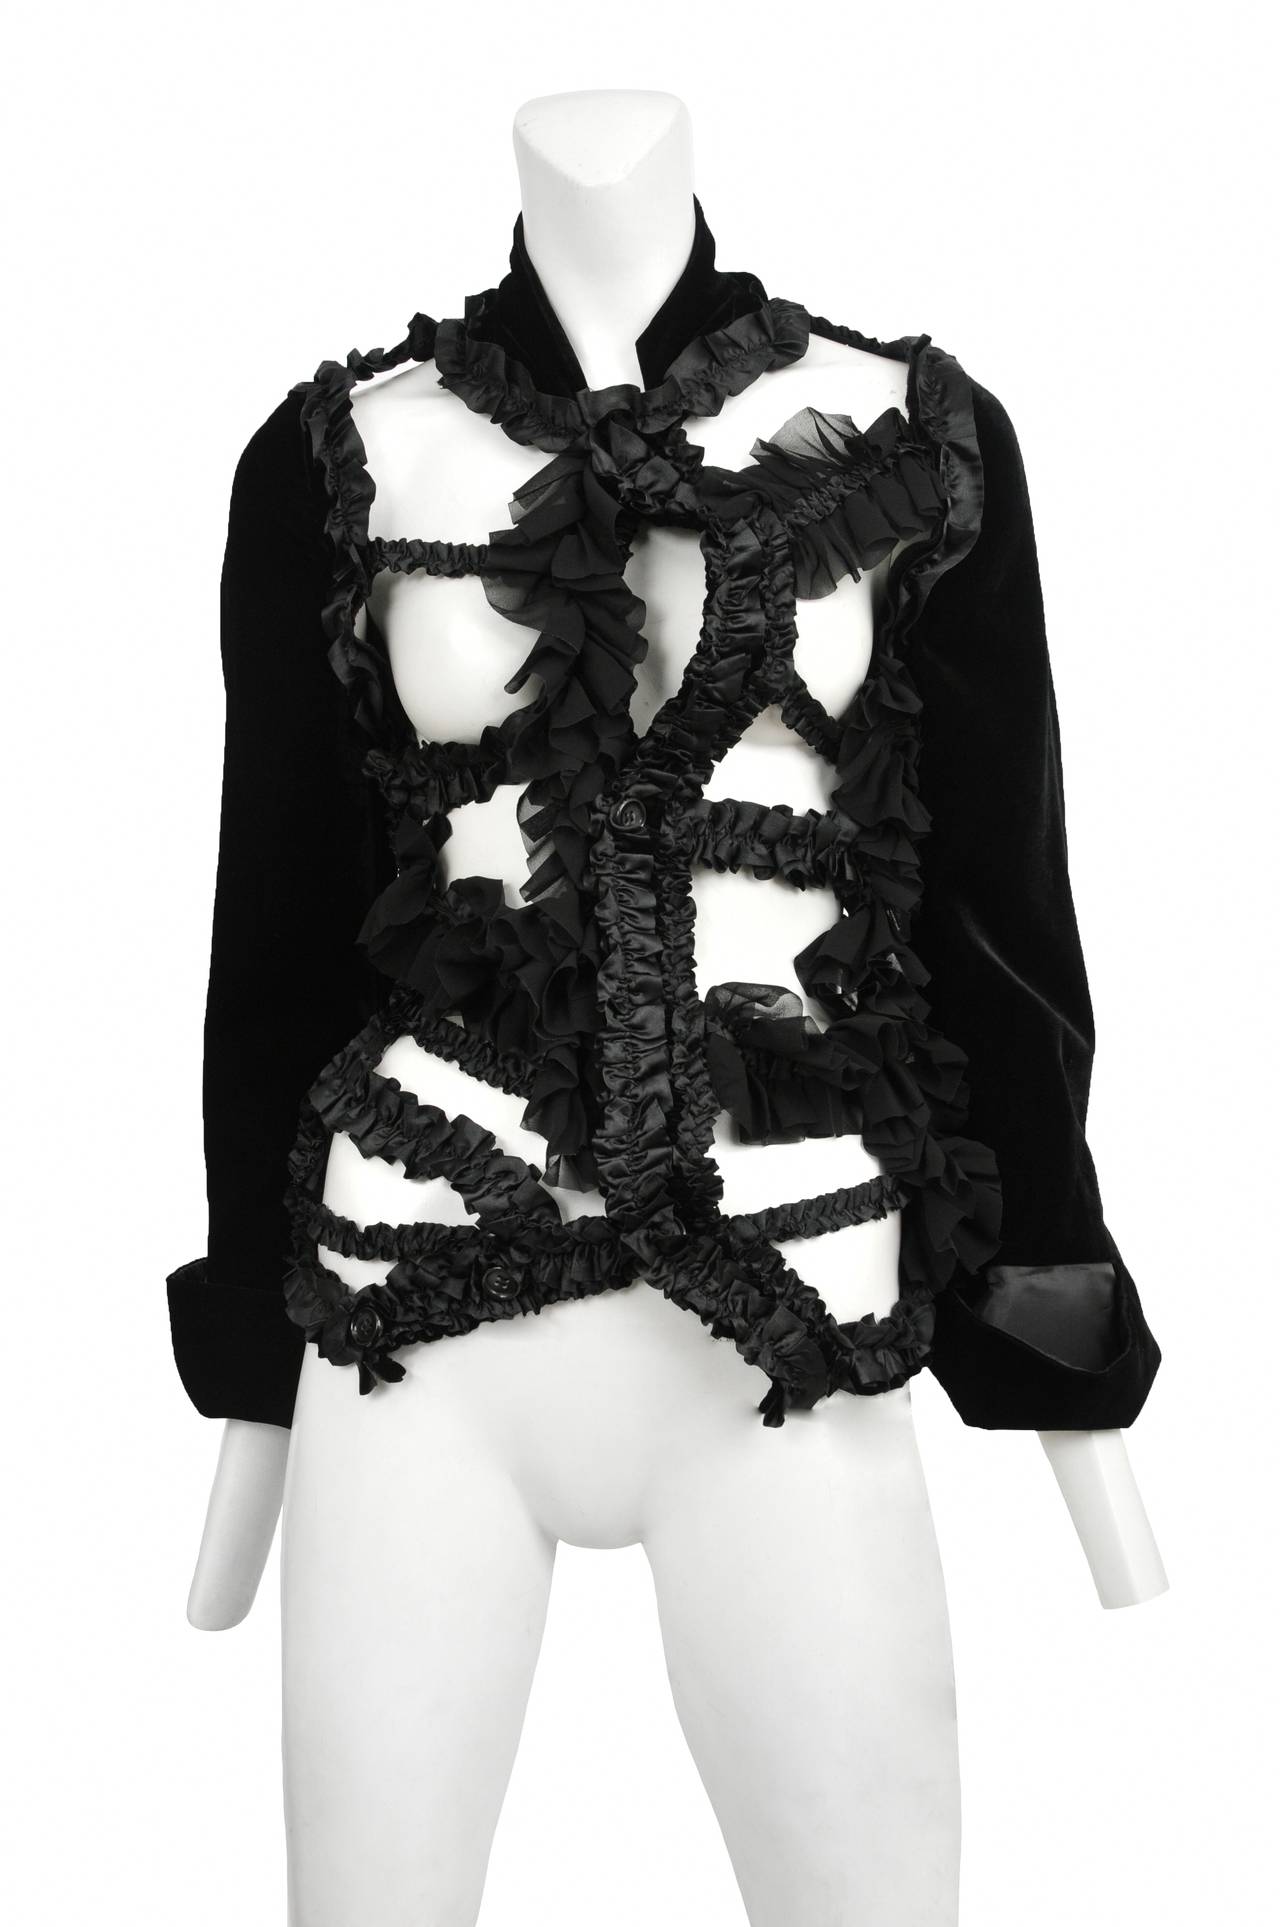 Future Classic Comme des Garcons black braces jacket with gathered satin ribbon, chiffon ruffle trim and velvet cuffed sleeves. AD2008